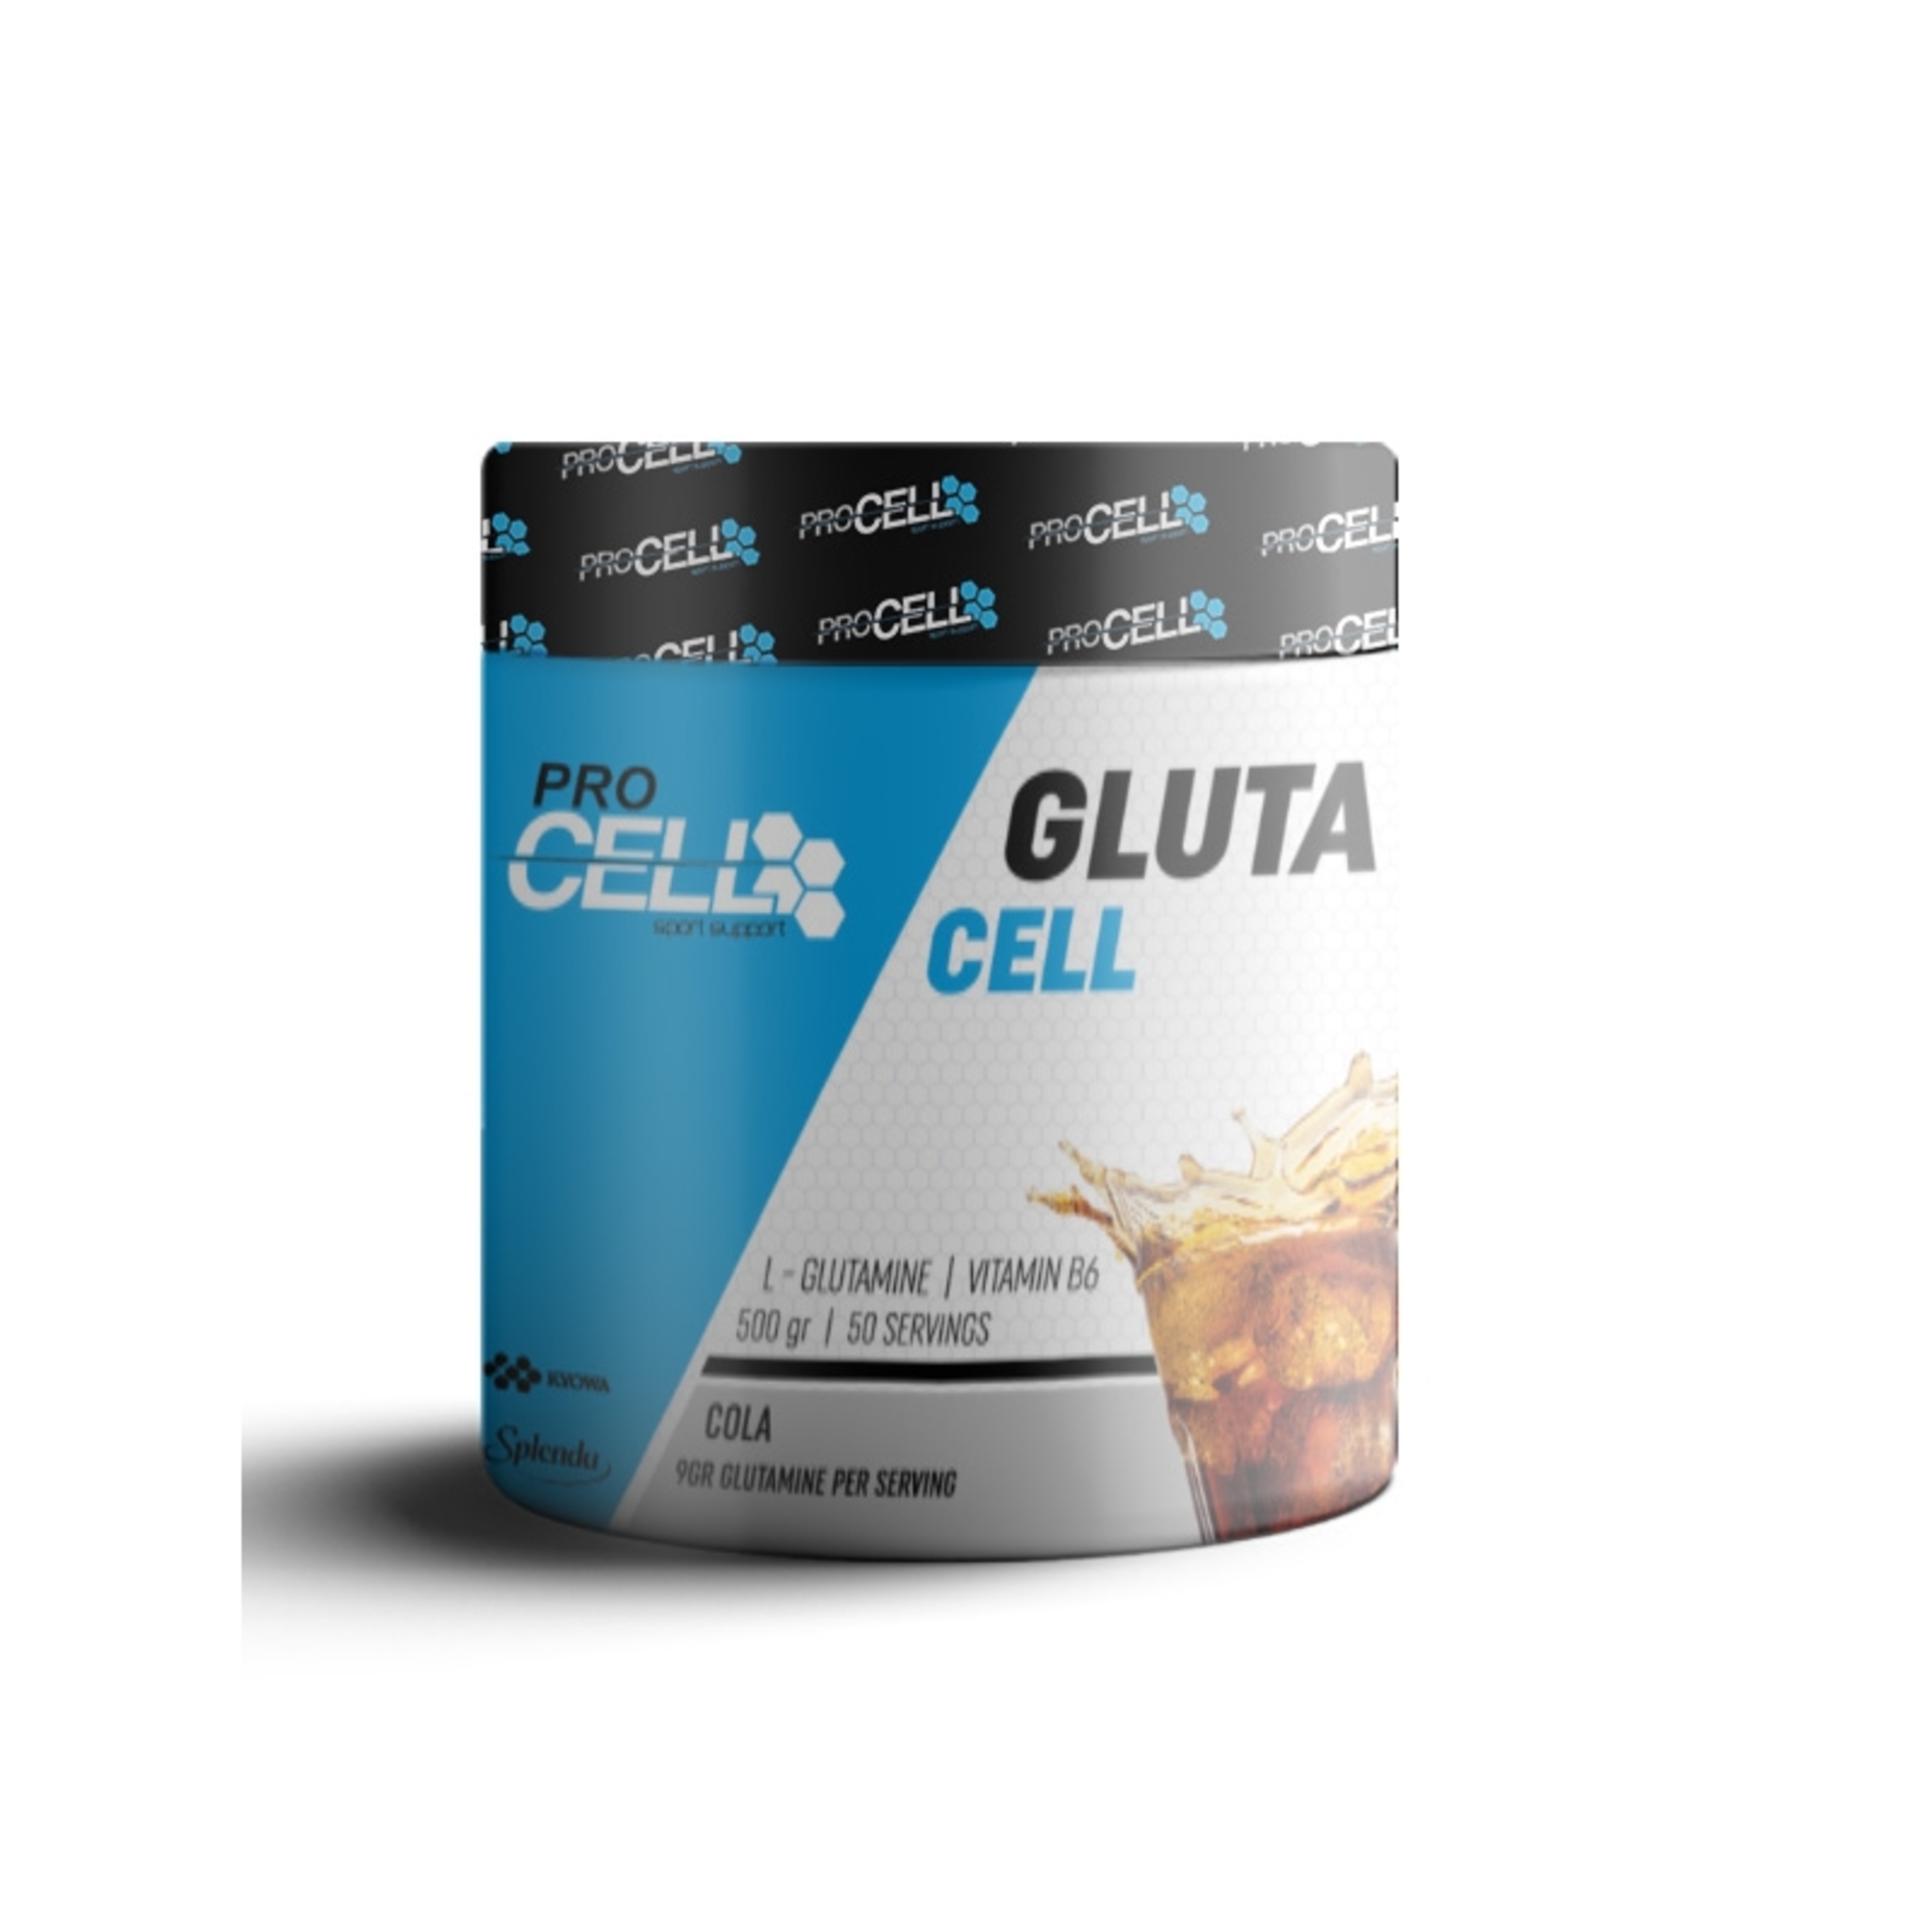 Glutacell 500gr Procell Cola -  - 